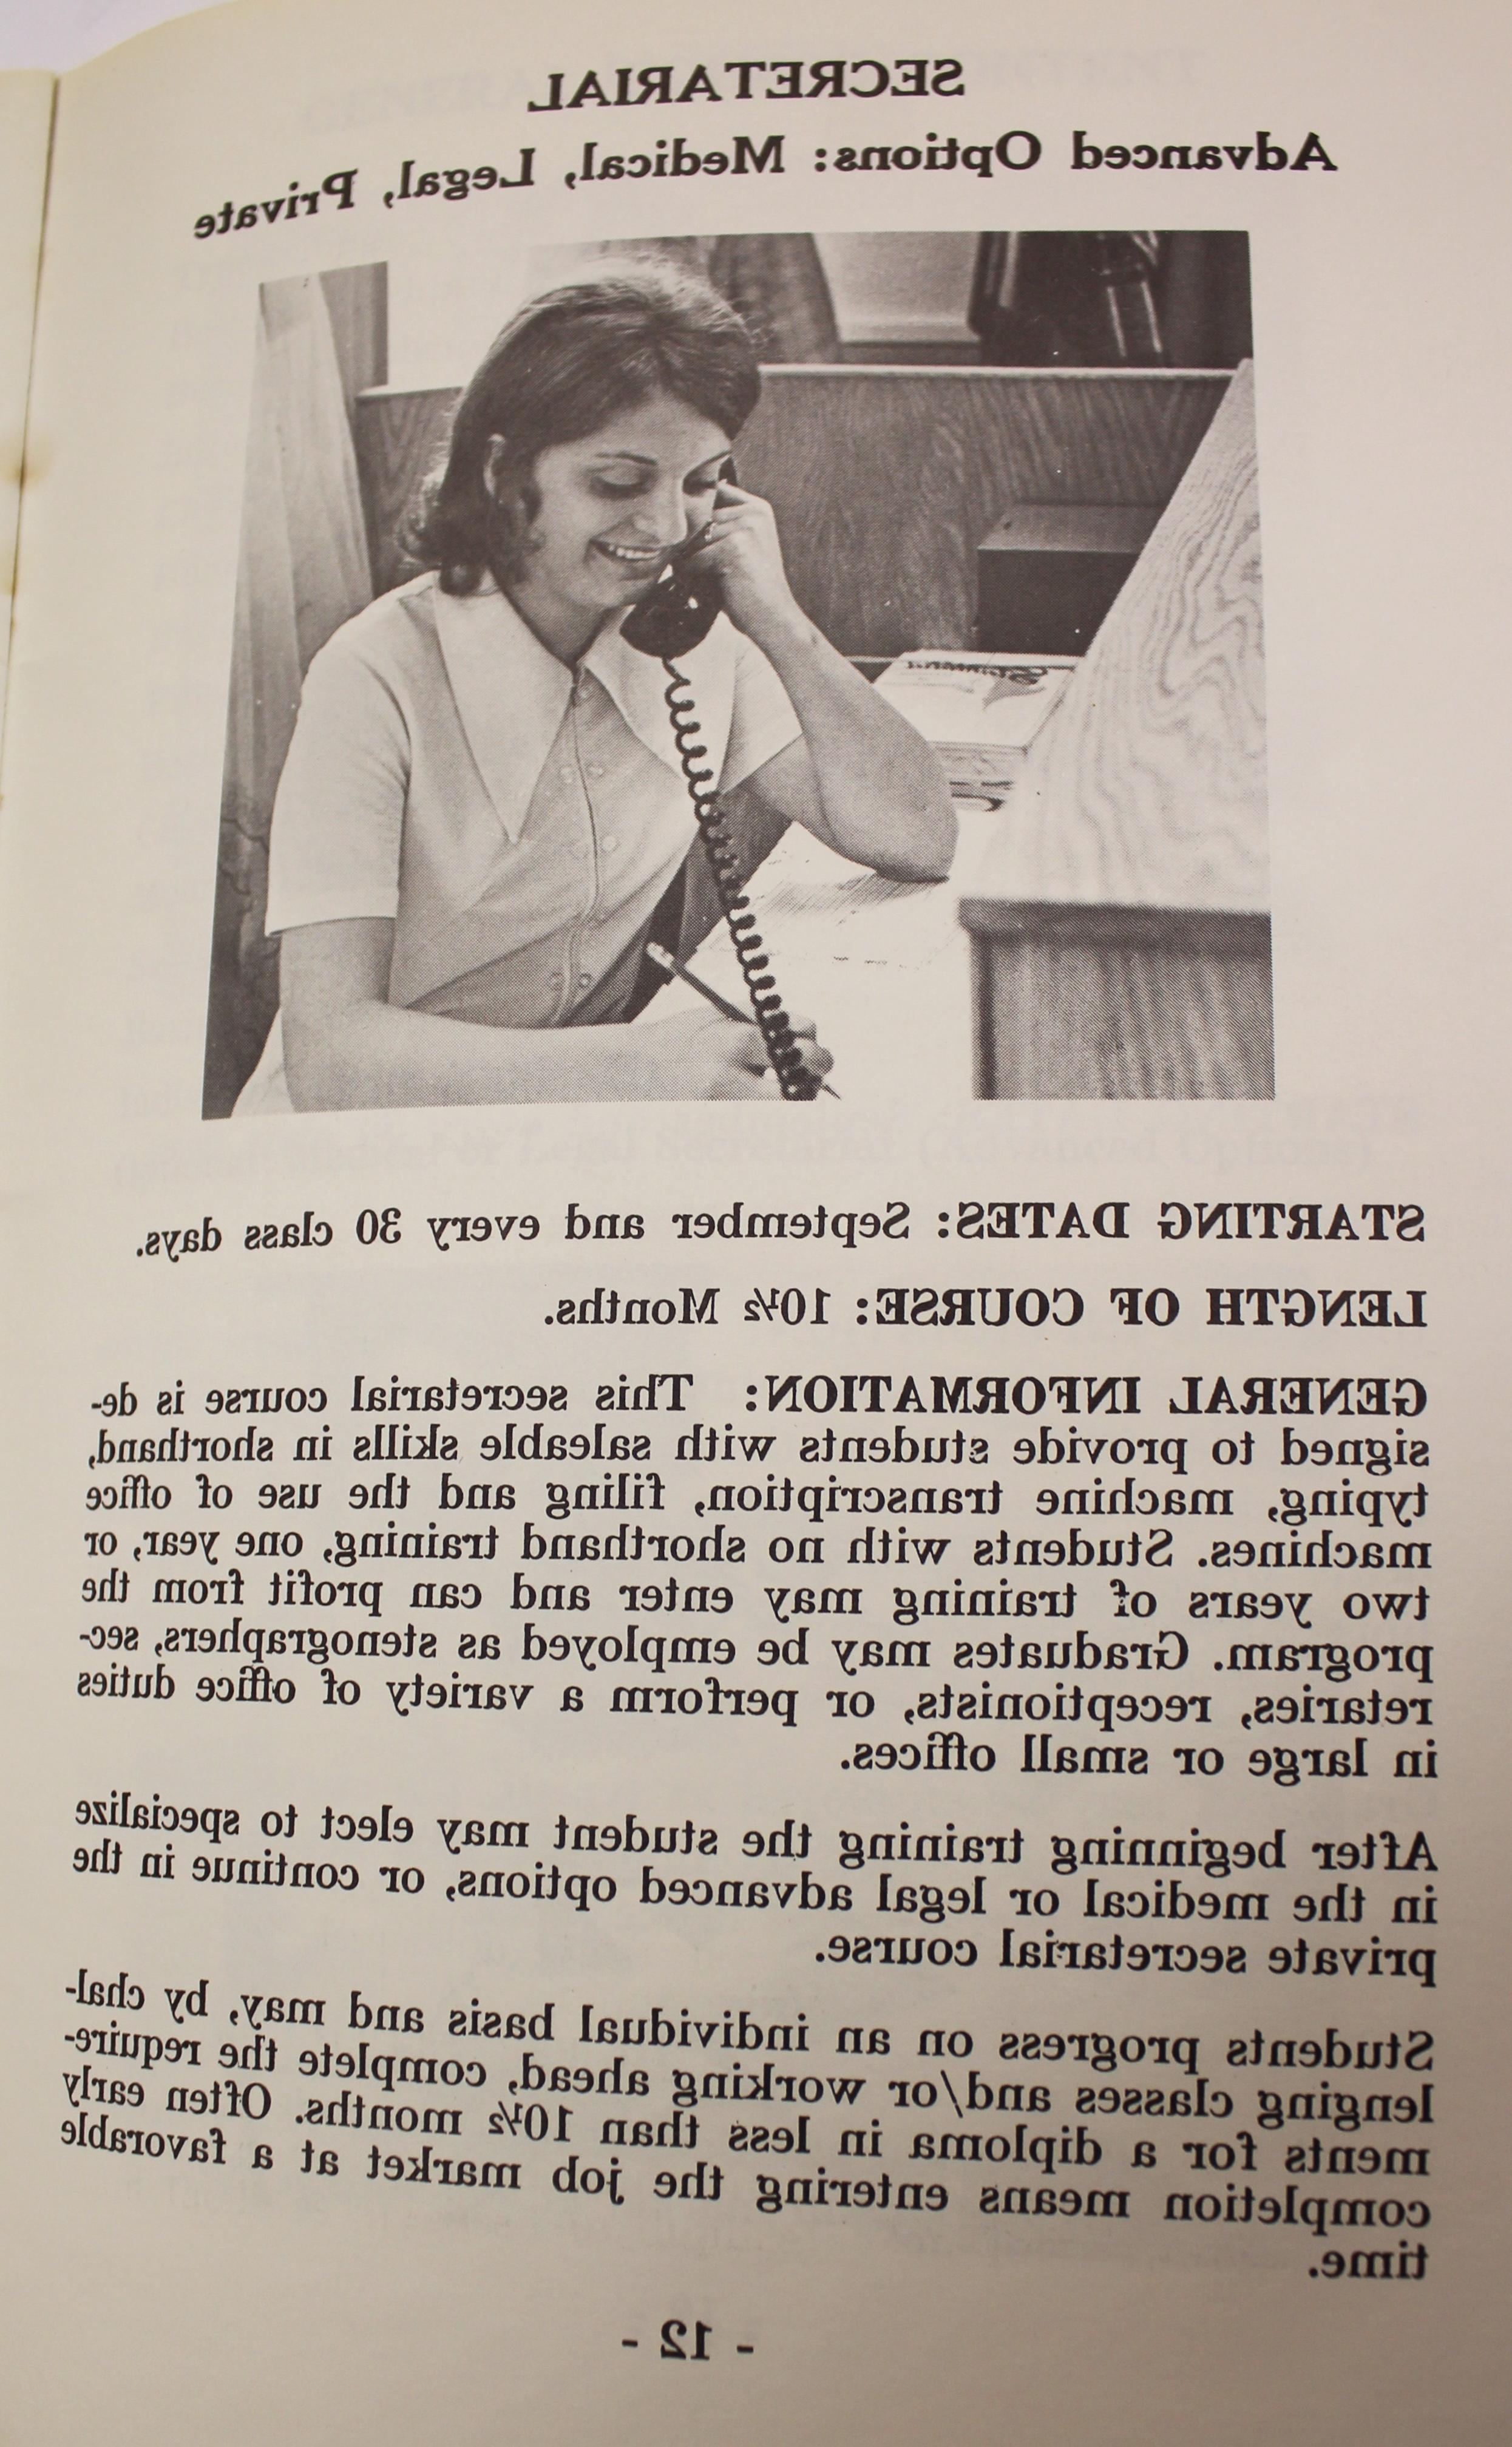 A page from an informational booklet about the Wadena college's secretarial program, year unknown